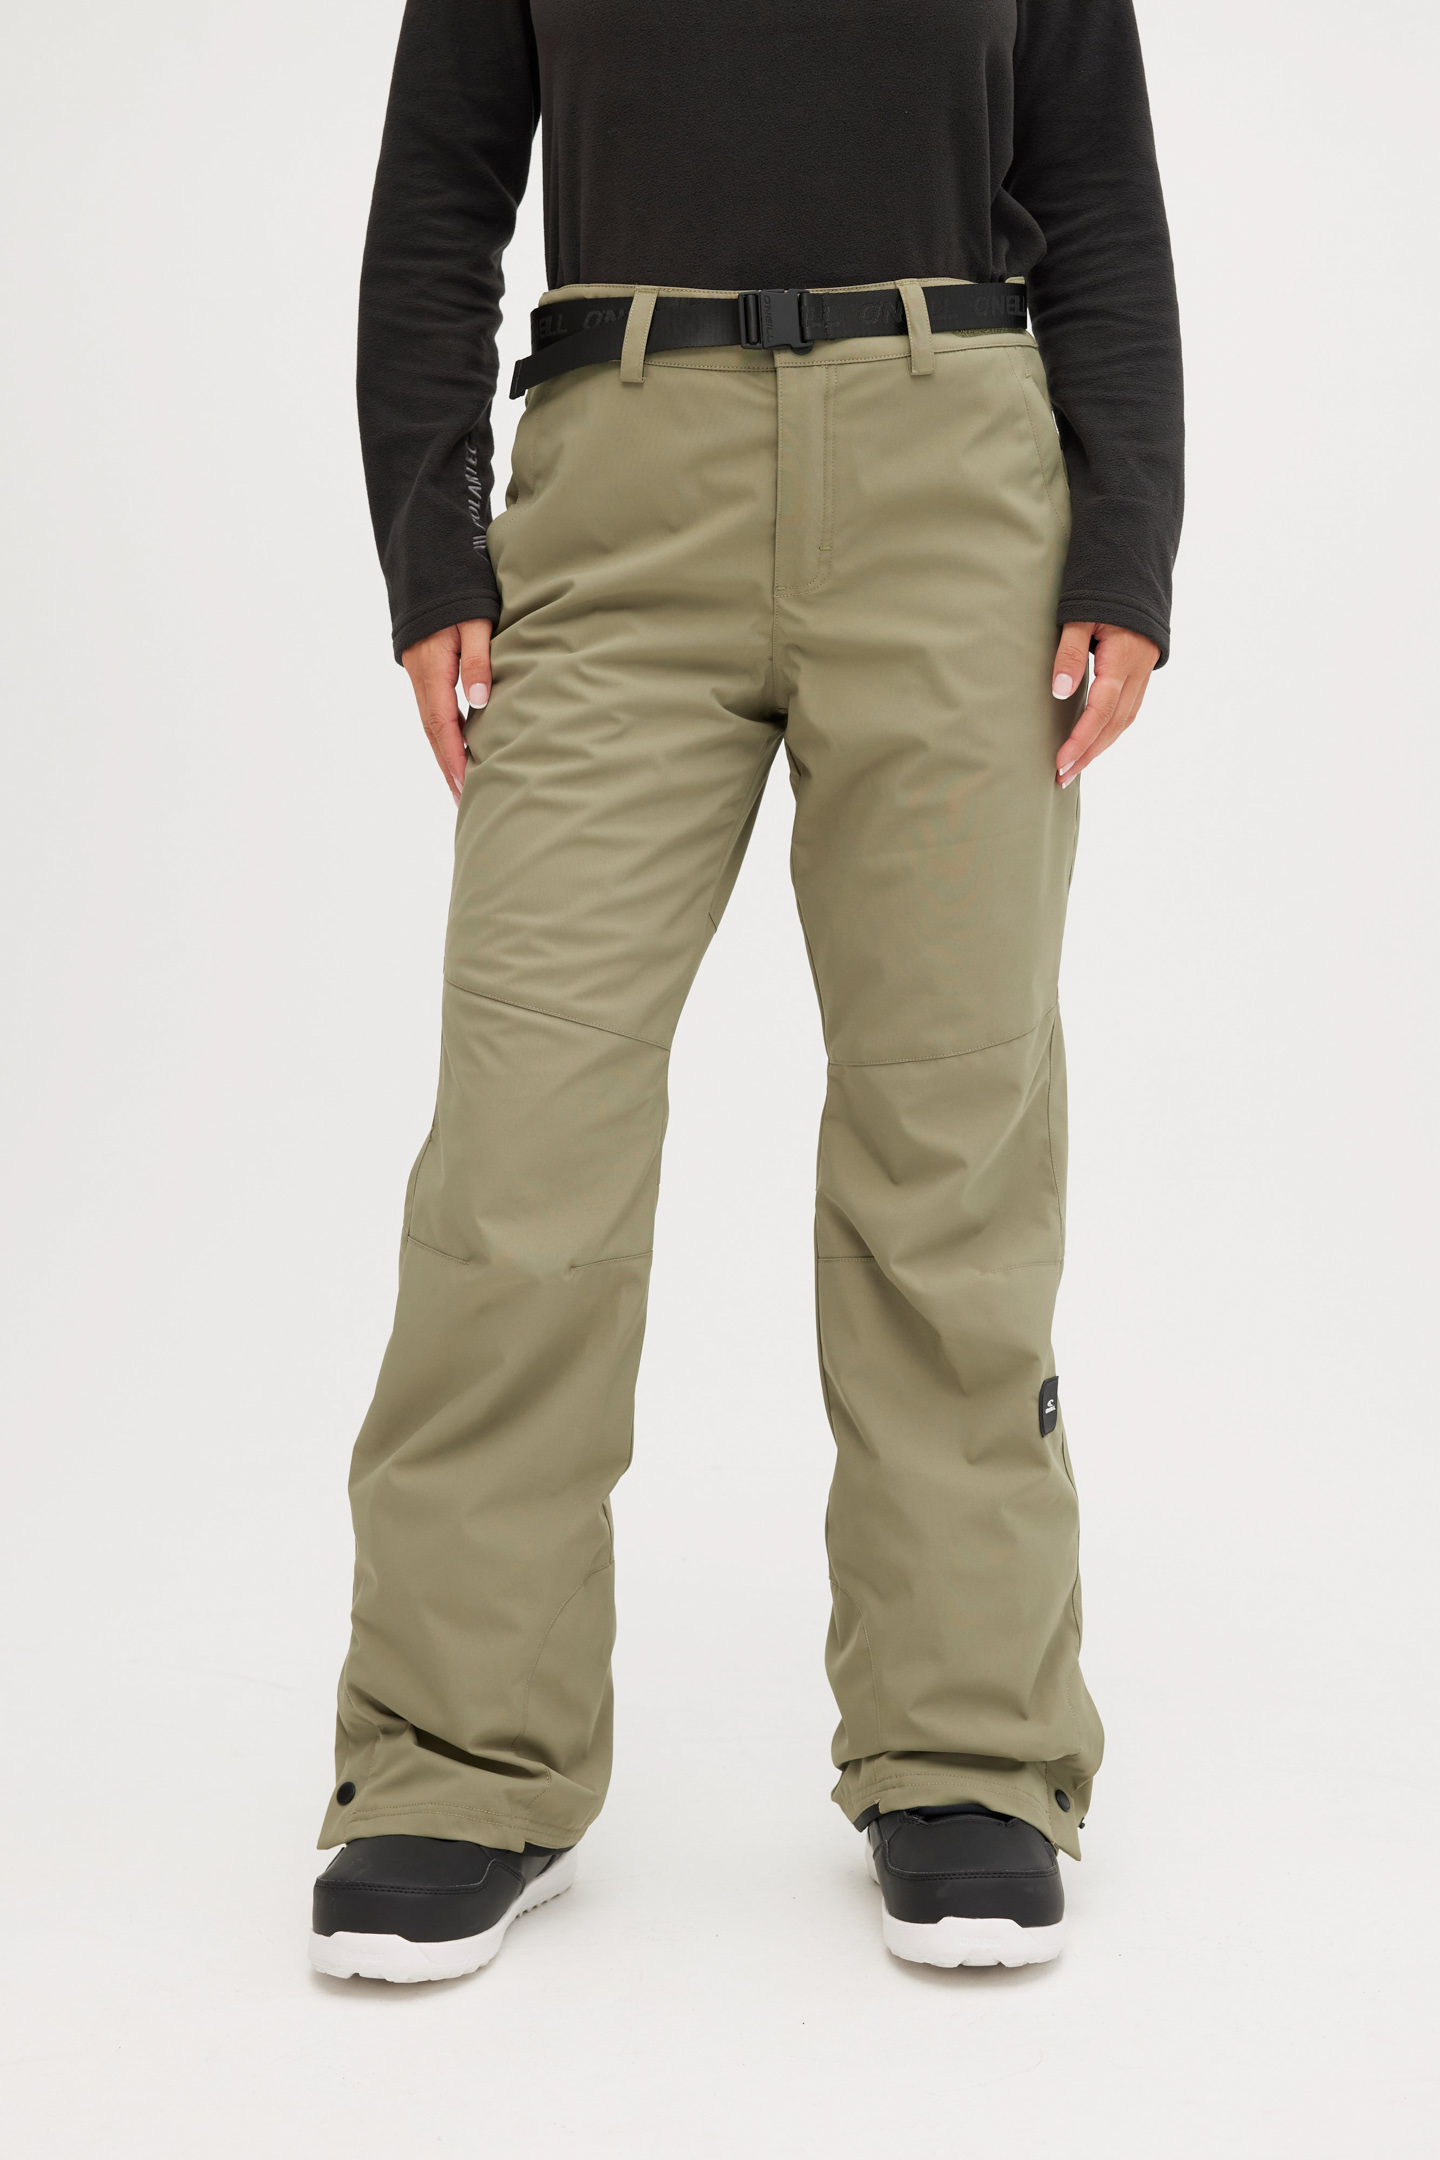 O'neill Star Insulated Pants Women's- Army Green